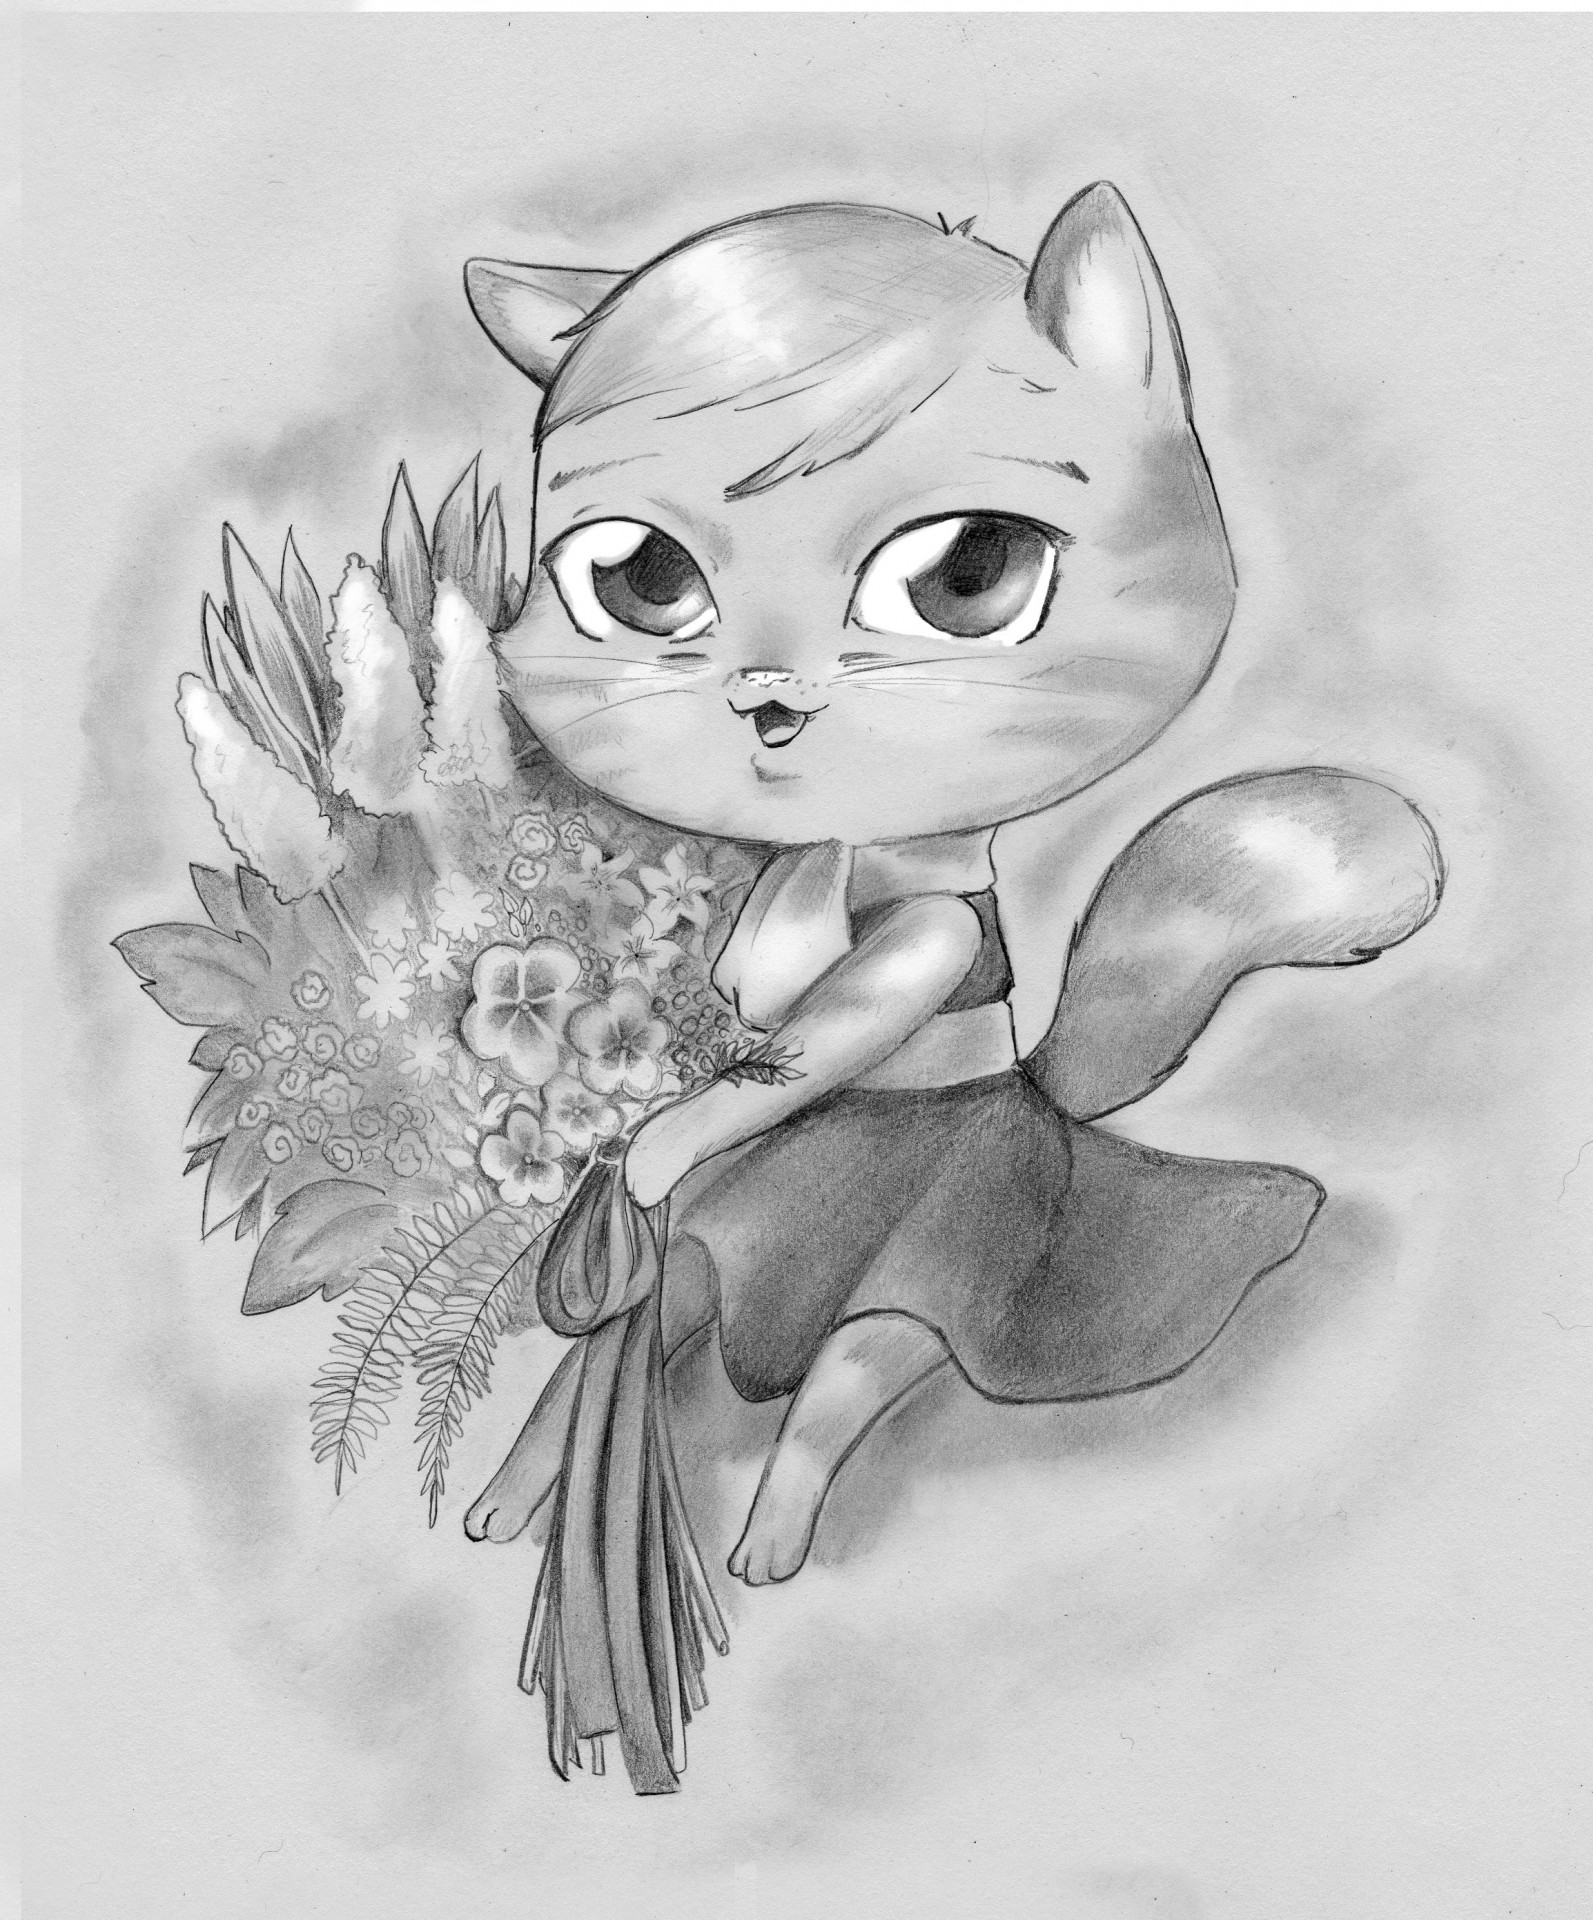 Pencil drawing of a cute cartoon-style cat with a bouquet of flowers